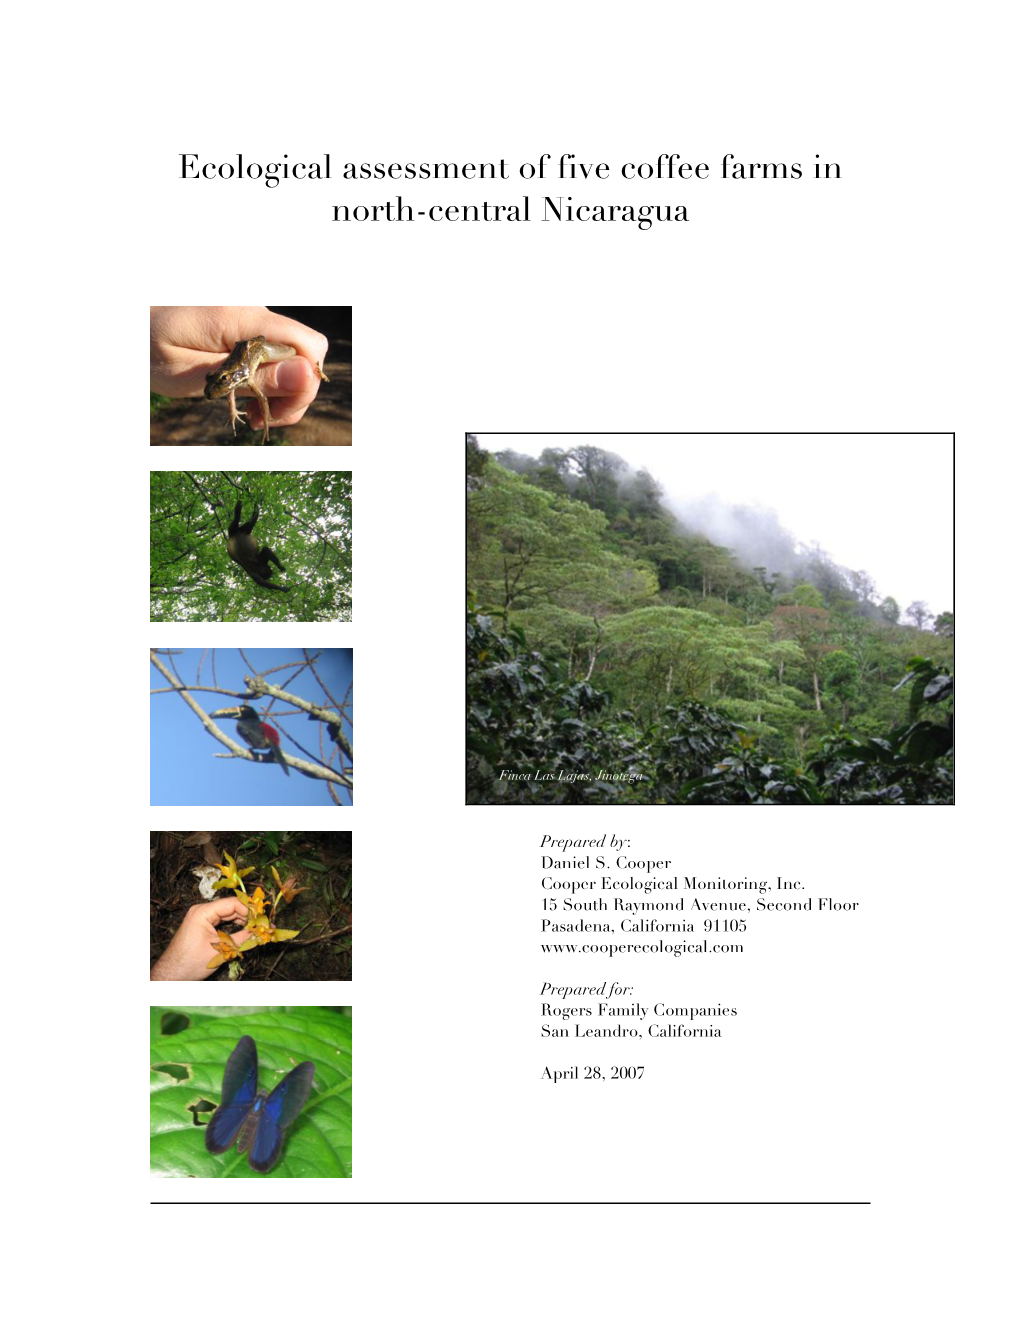 Ecological Assessment of Five Coffee Farms in North-Central Nicaragua